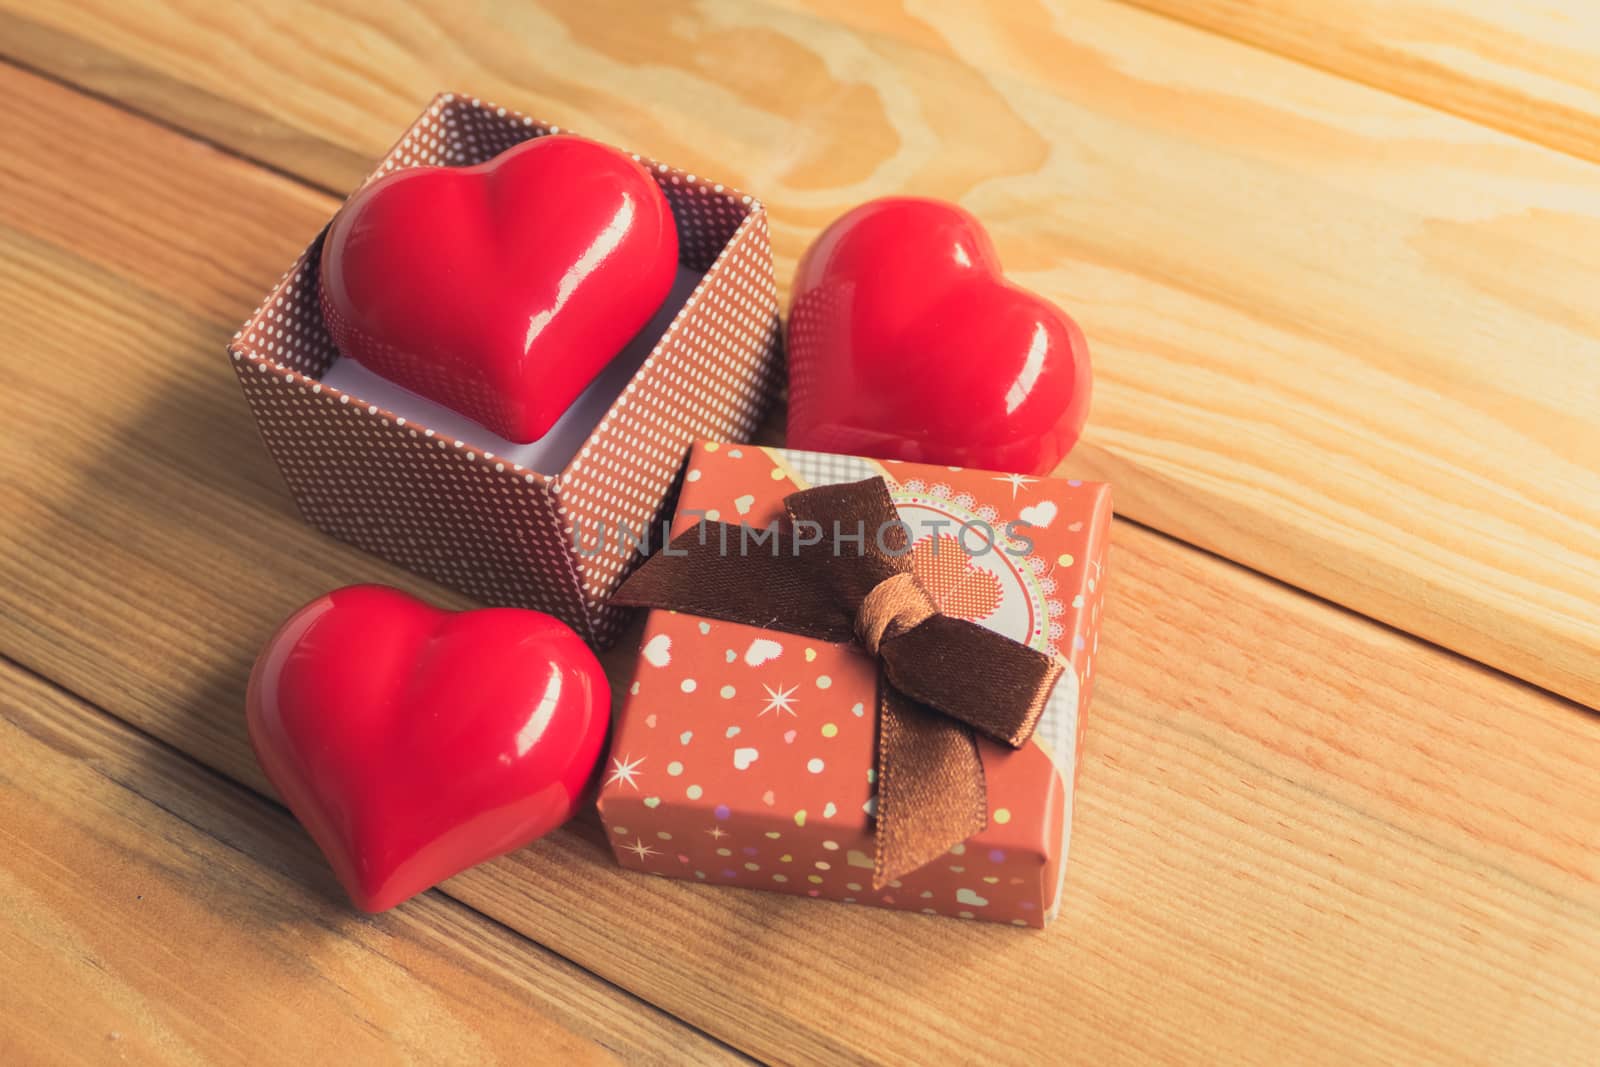 Gift of love. hearty gift. A gift box with a red heart inside. by teerawit